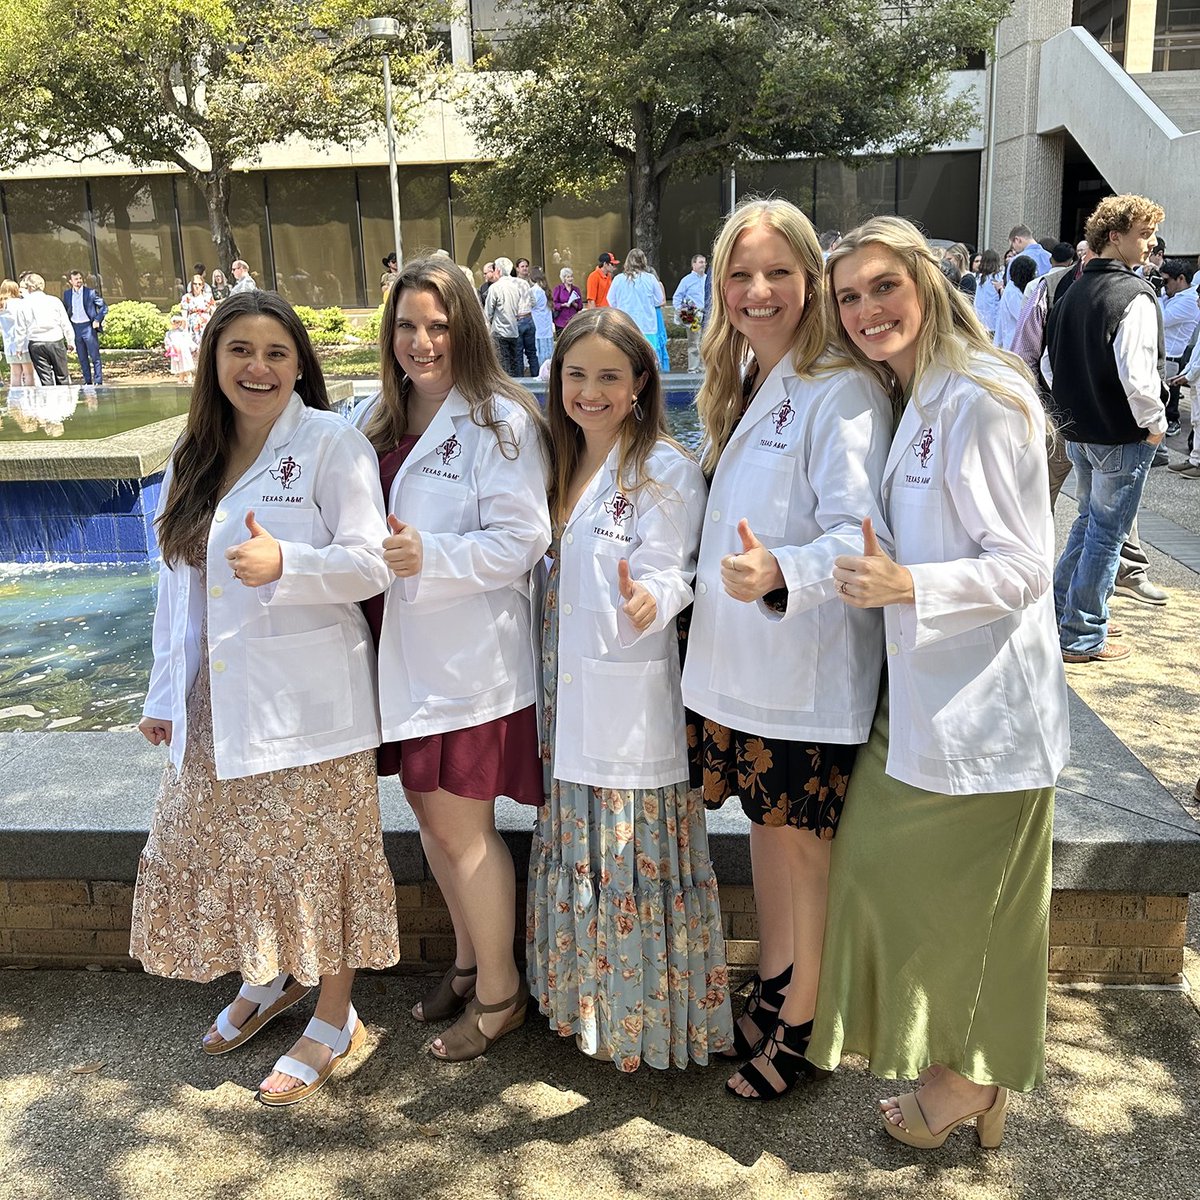 At this point in the spring semester, our third-year veterinary students are getting ready for a whole year of clinical rotations.

Veterinary student Elizabeth shares her excitements about starting fourth year in her ambassador blog: vetmed.tamu.edu/ambassadors/20…

#TAMUVetMed